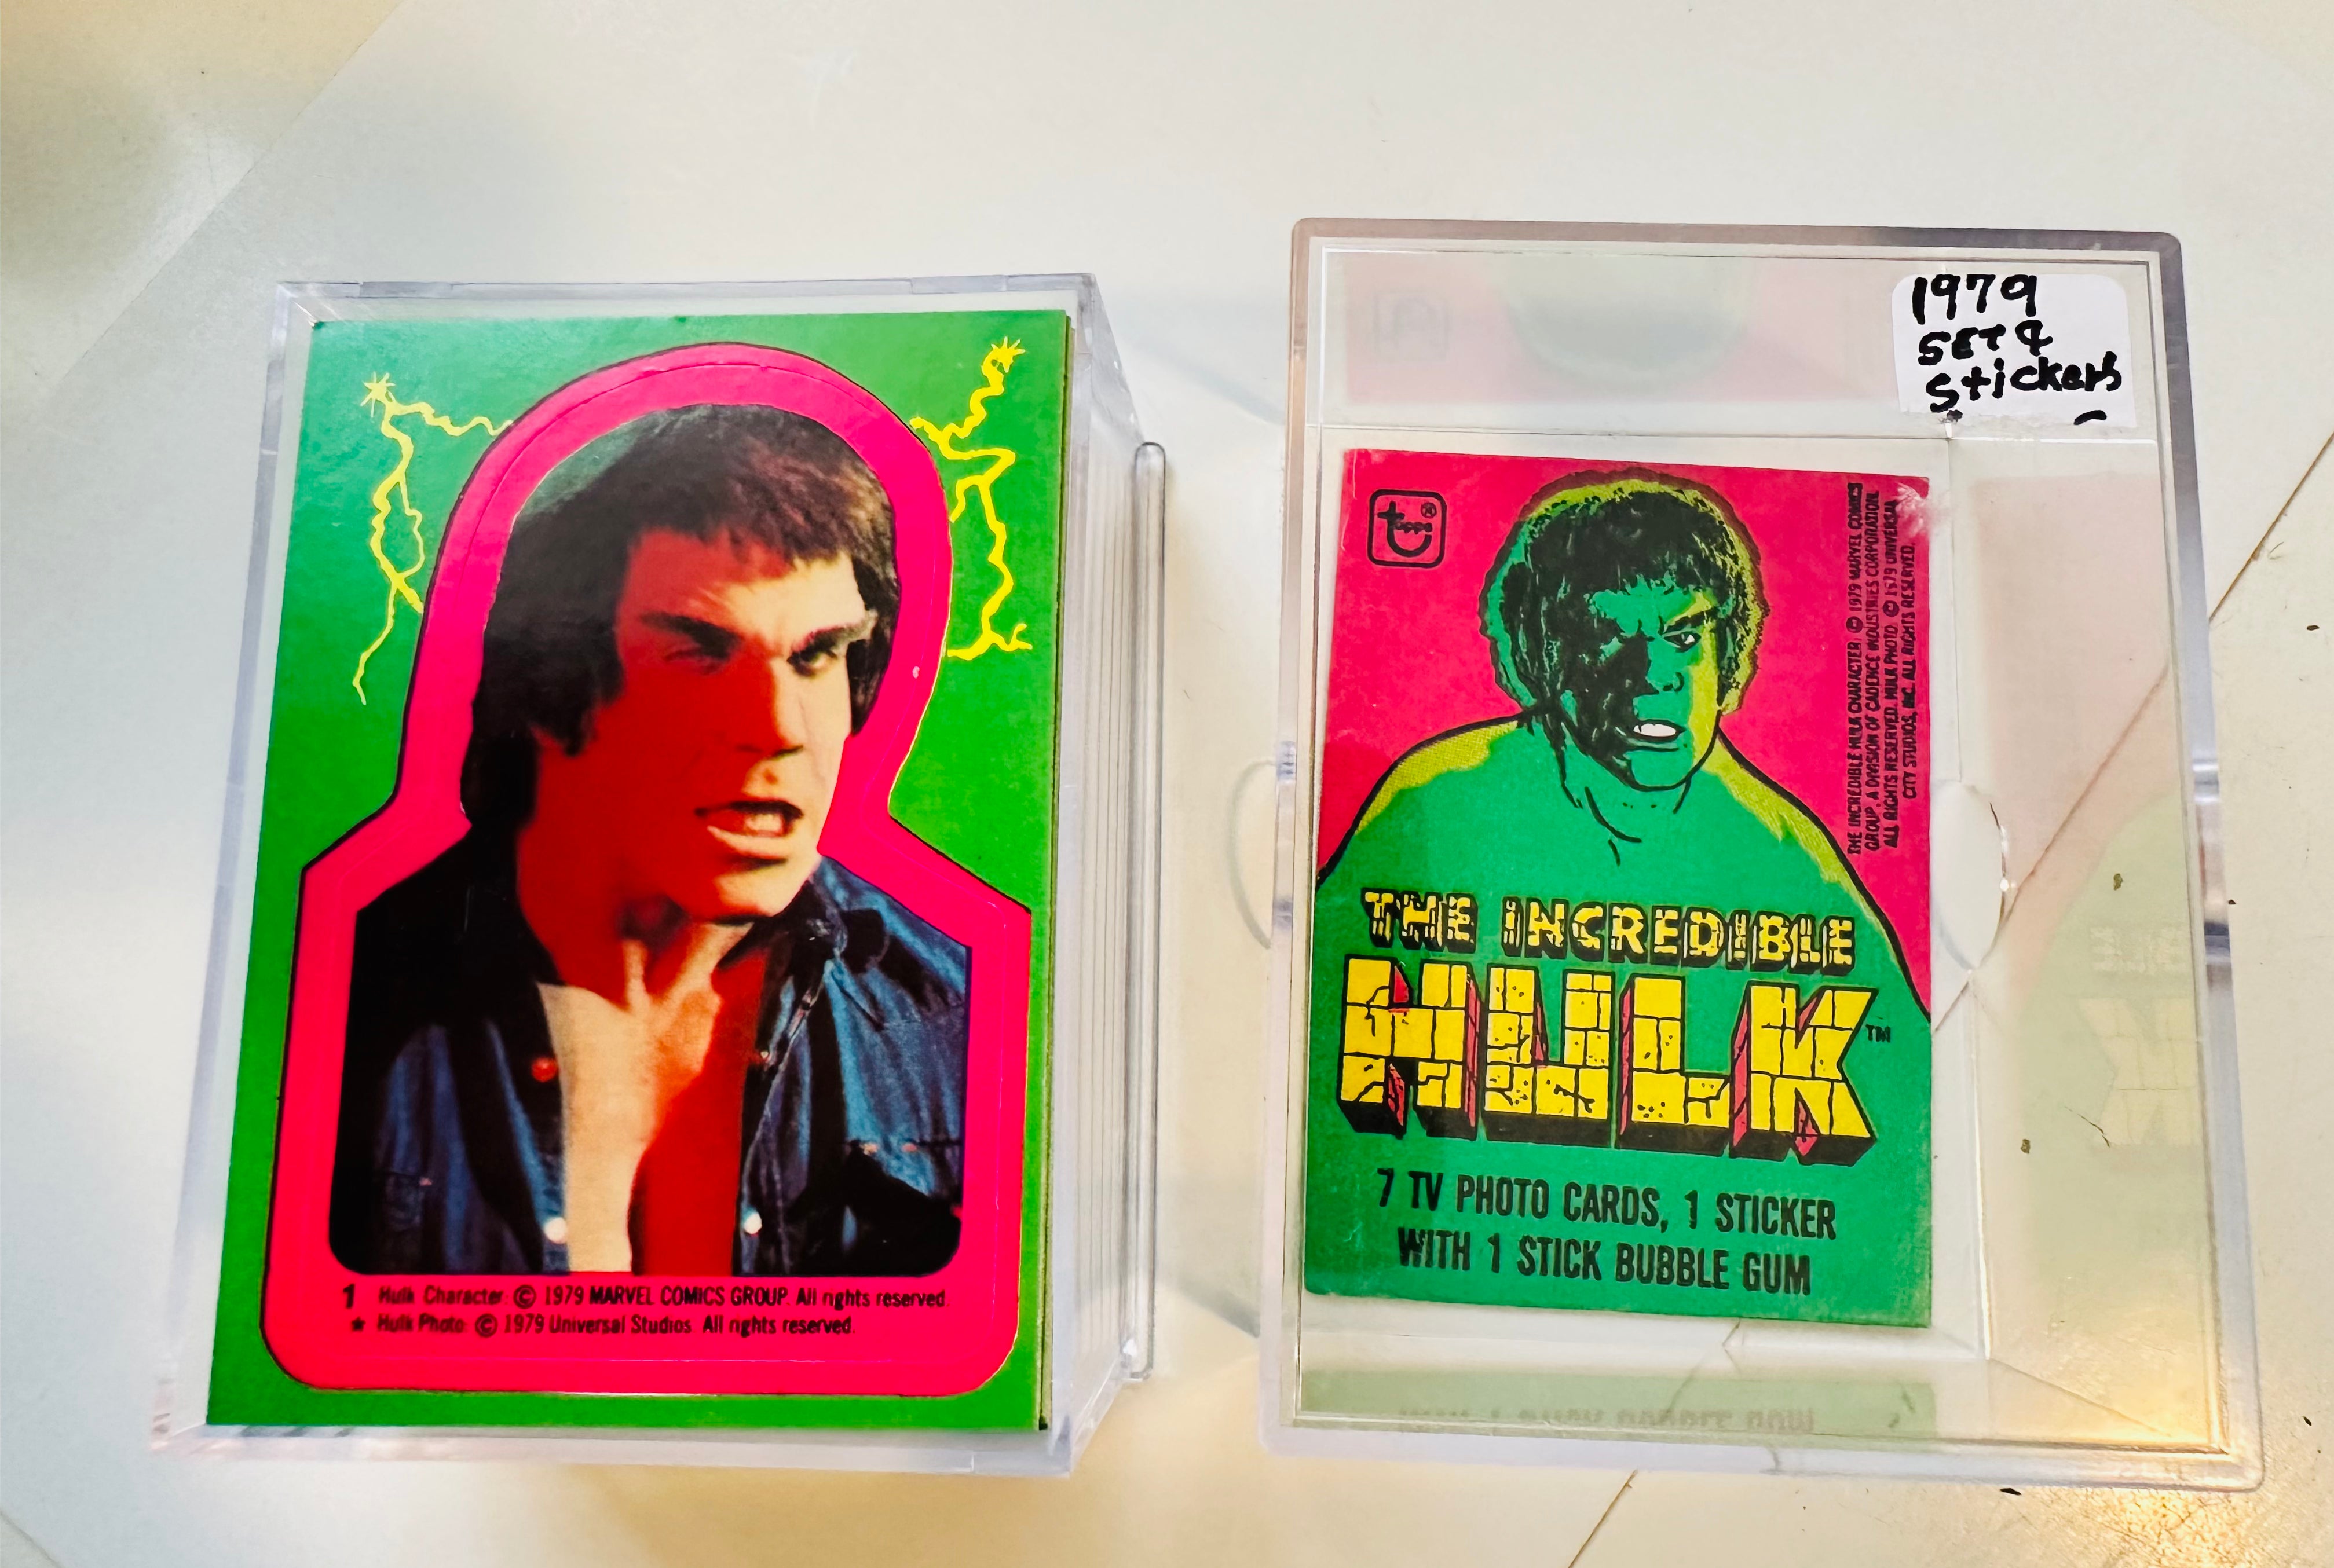 Incredible Hulk TV show high grade condition cards and stickers set 1979